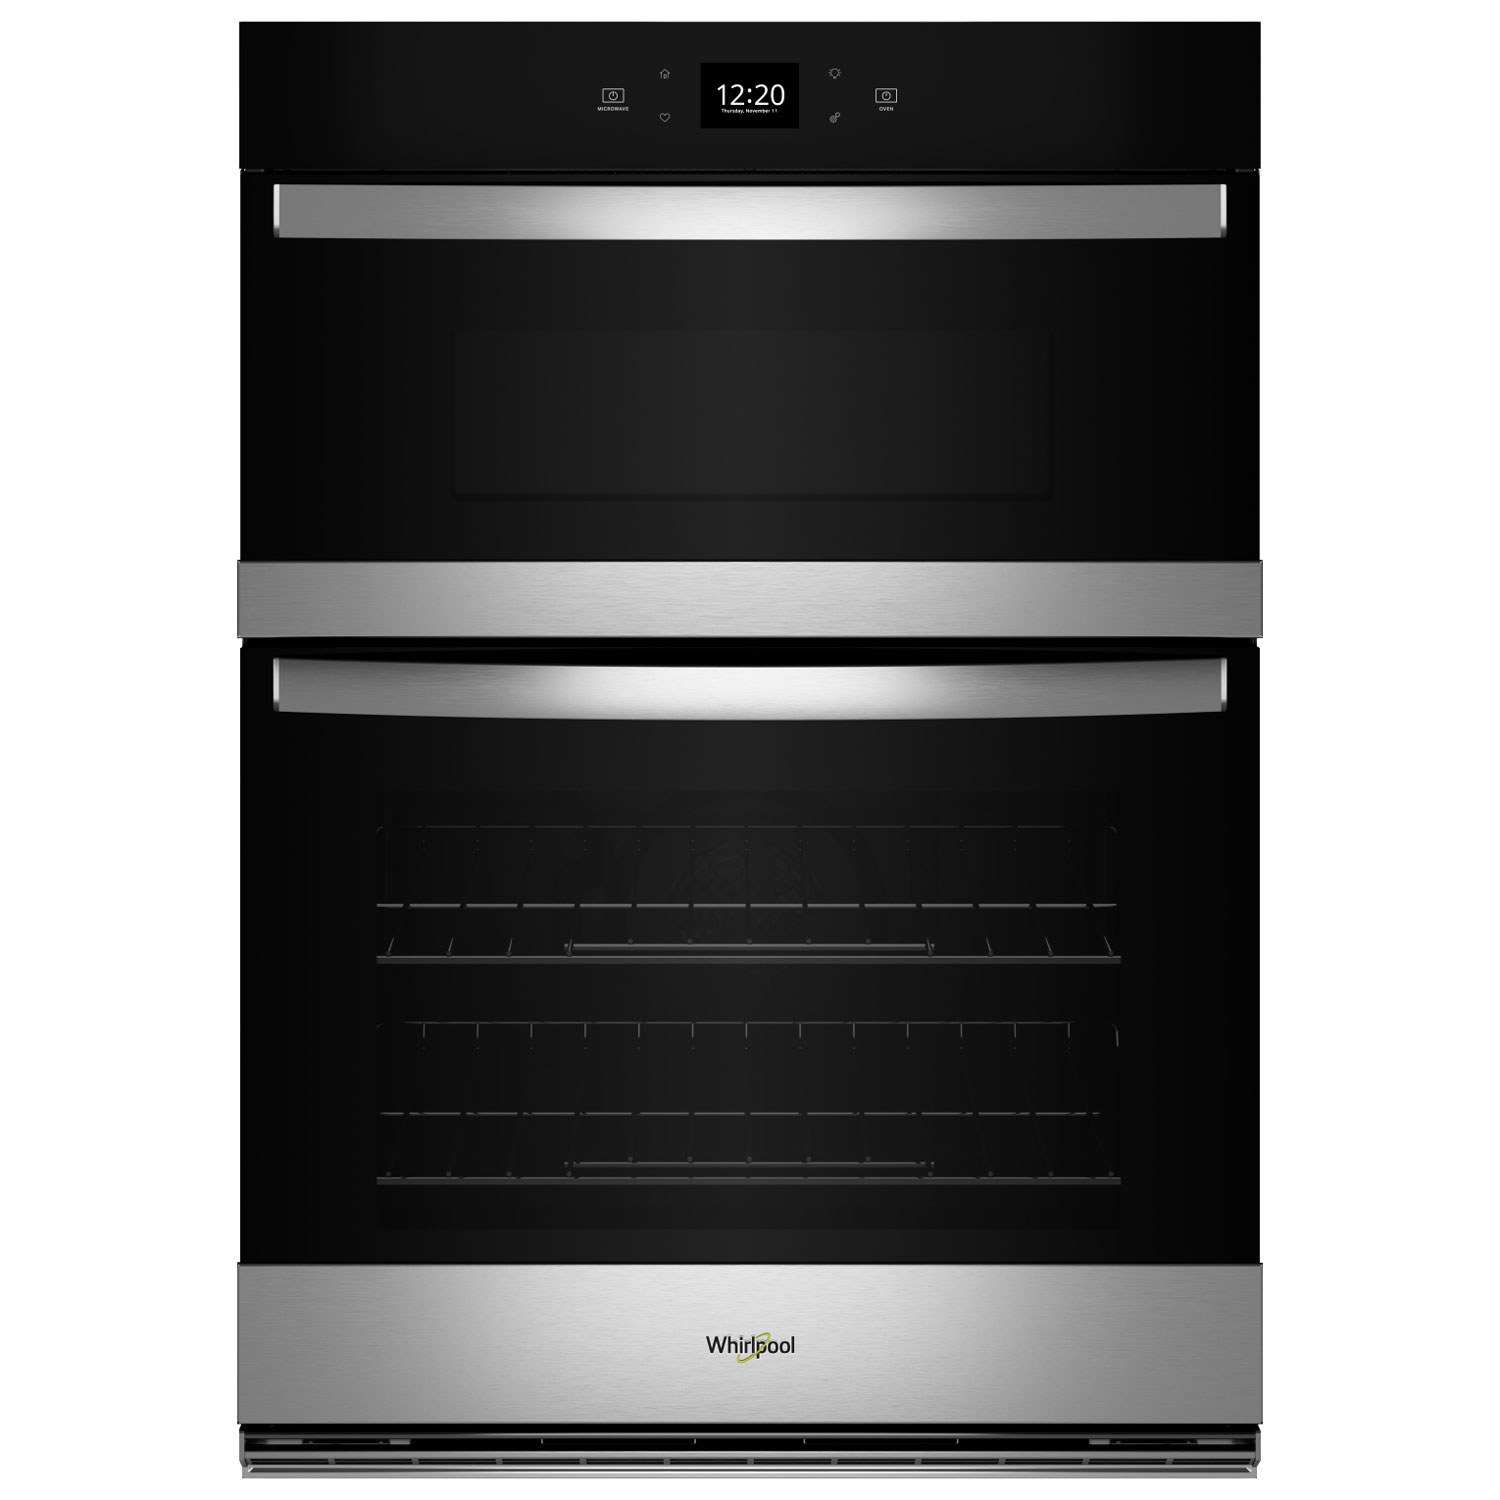 Whirlpool 21" 5.7 Cu. Ft. Combination Electric Wall Oven (WOEC5027LZ) -Fingerprint Resistant Stainless Steel